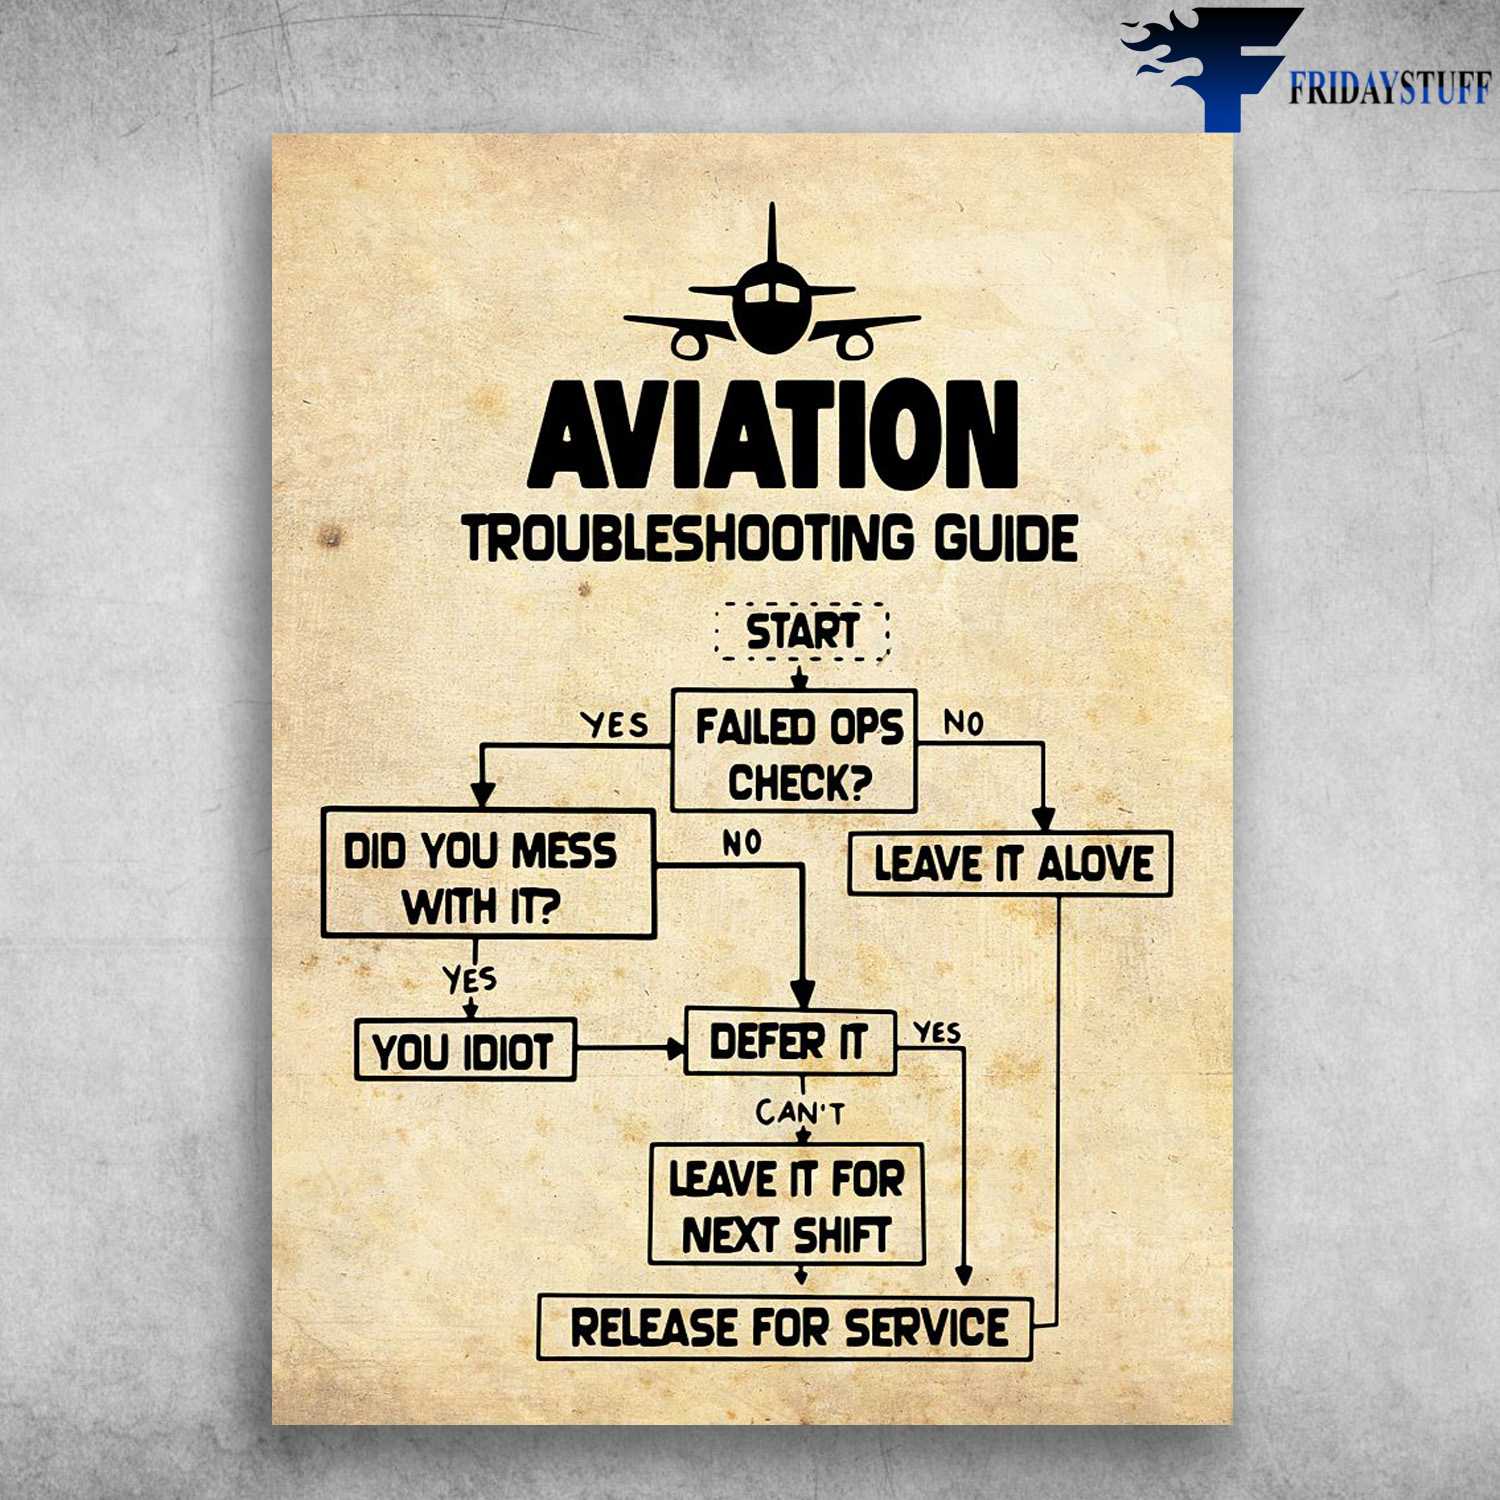 Aviation Troubleshooting Guide - Airplane Poster, Failted Ops Check, Did You Mess With It, Leave It Alove, You Idiot, Defer It